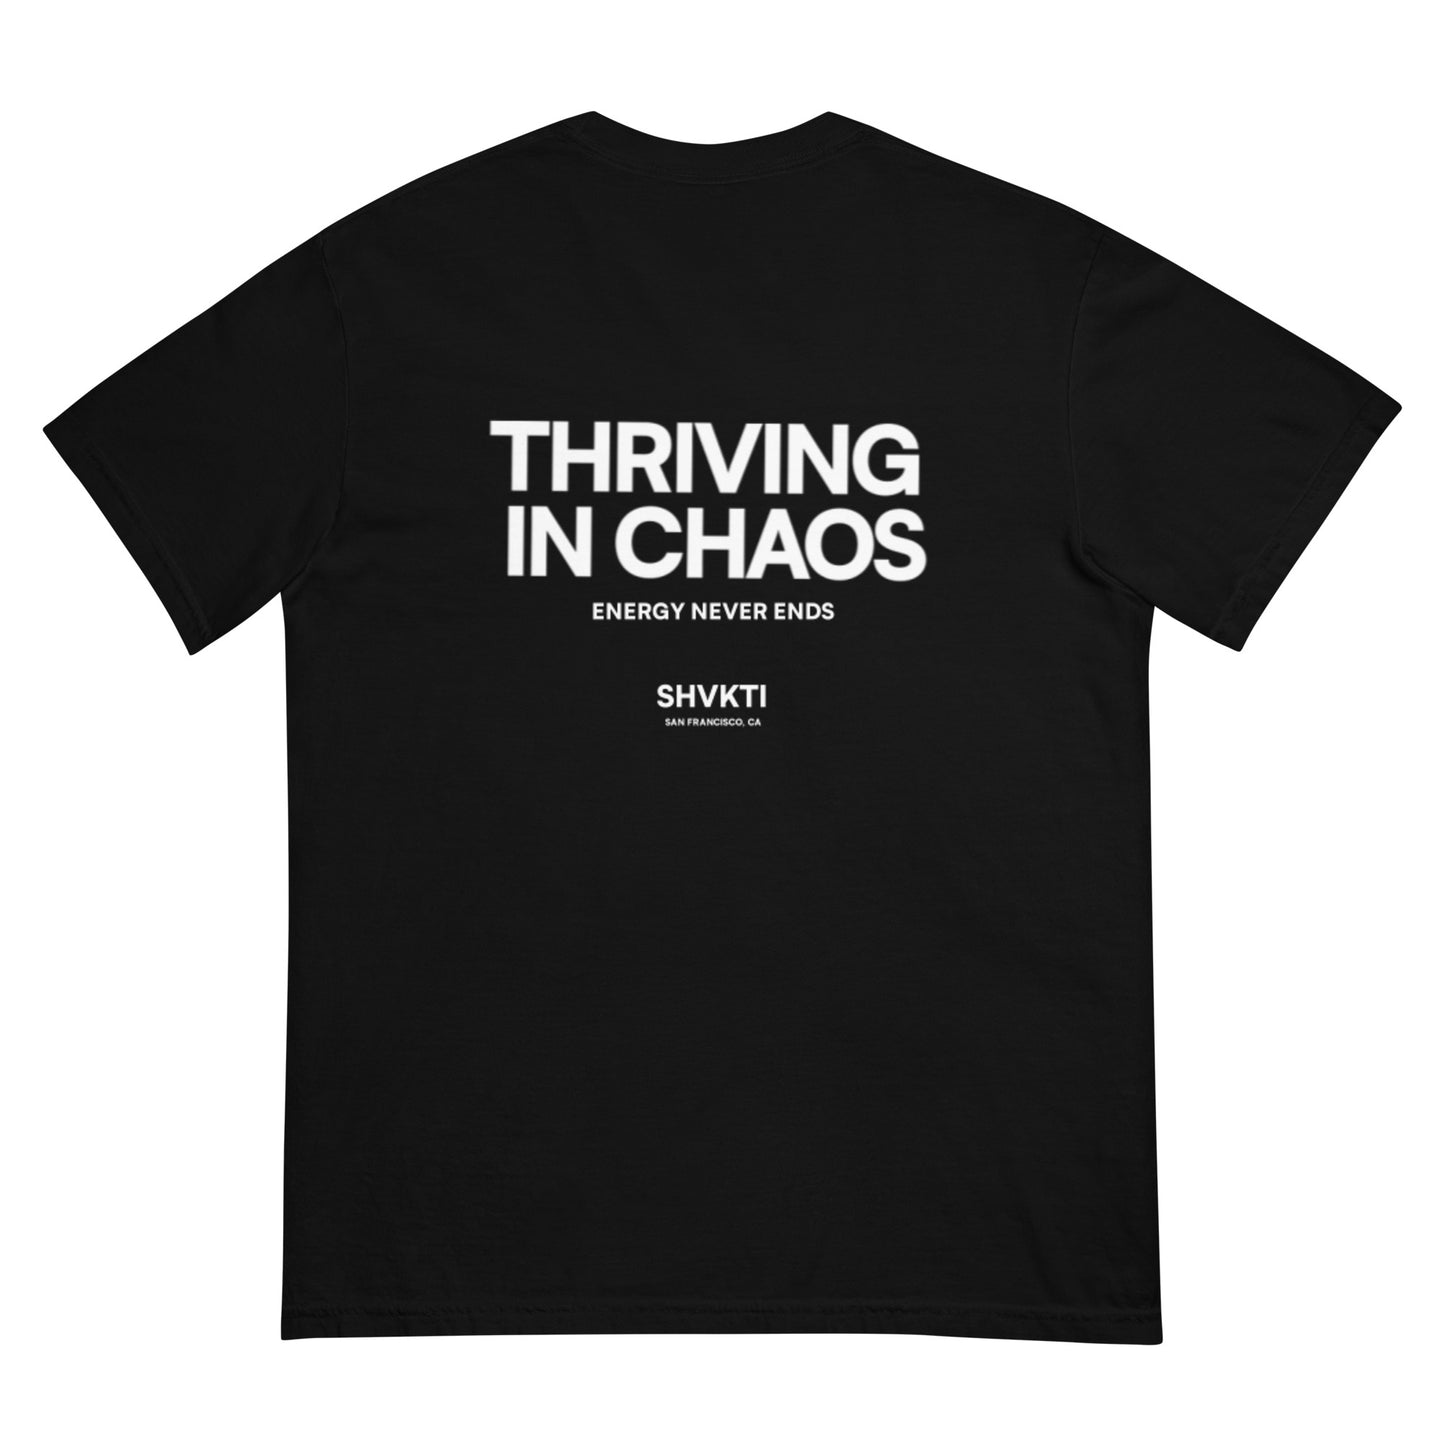 THRIVING IN CHAOS - VOL. 2 (T-SHIRT) RED